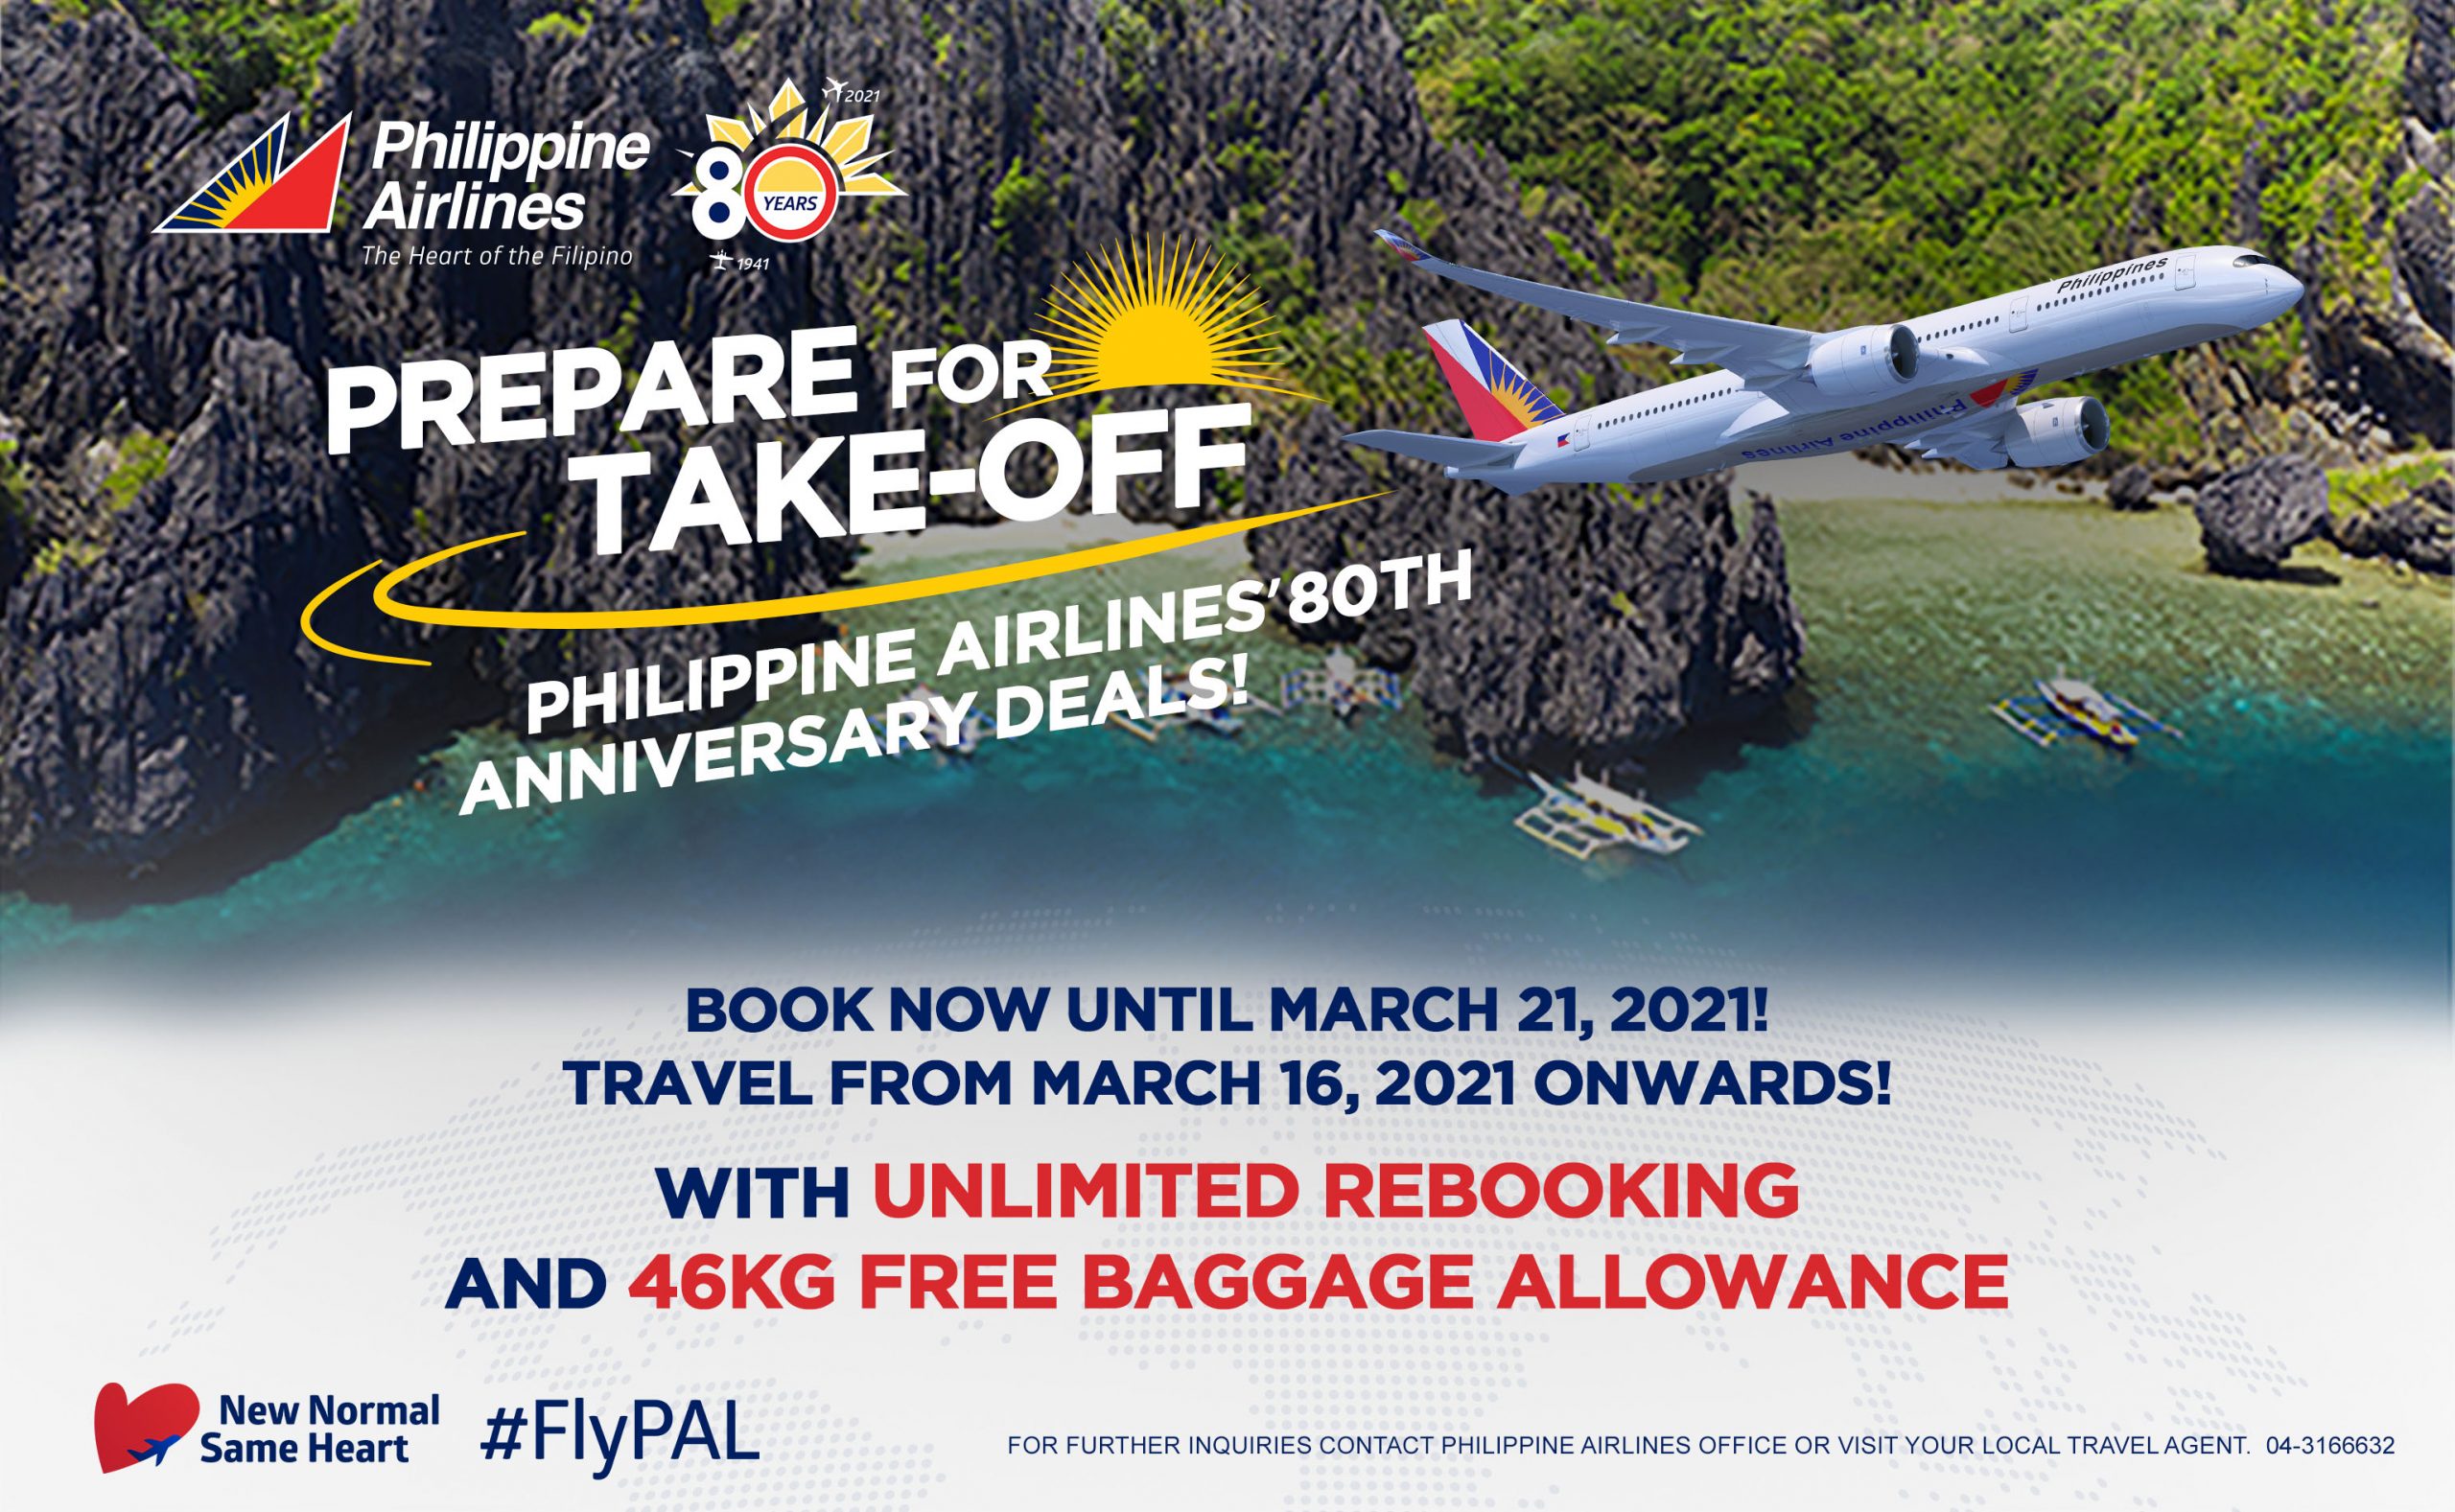 From AED1,180 DXBManila roundtrip flights to unlimited rebooking and